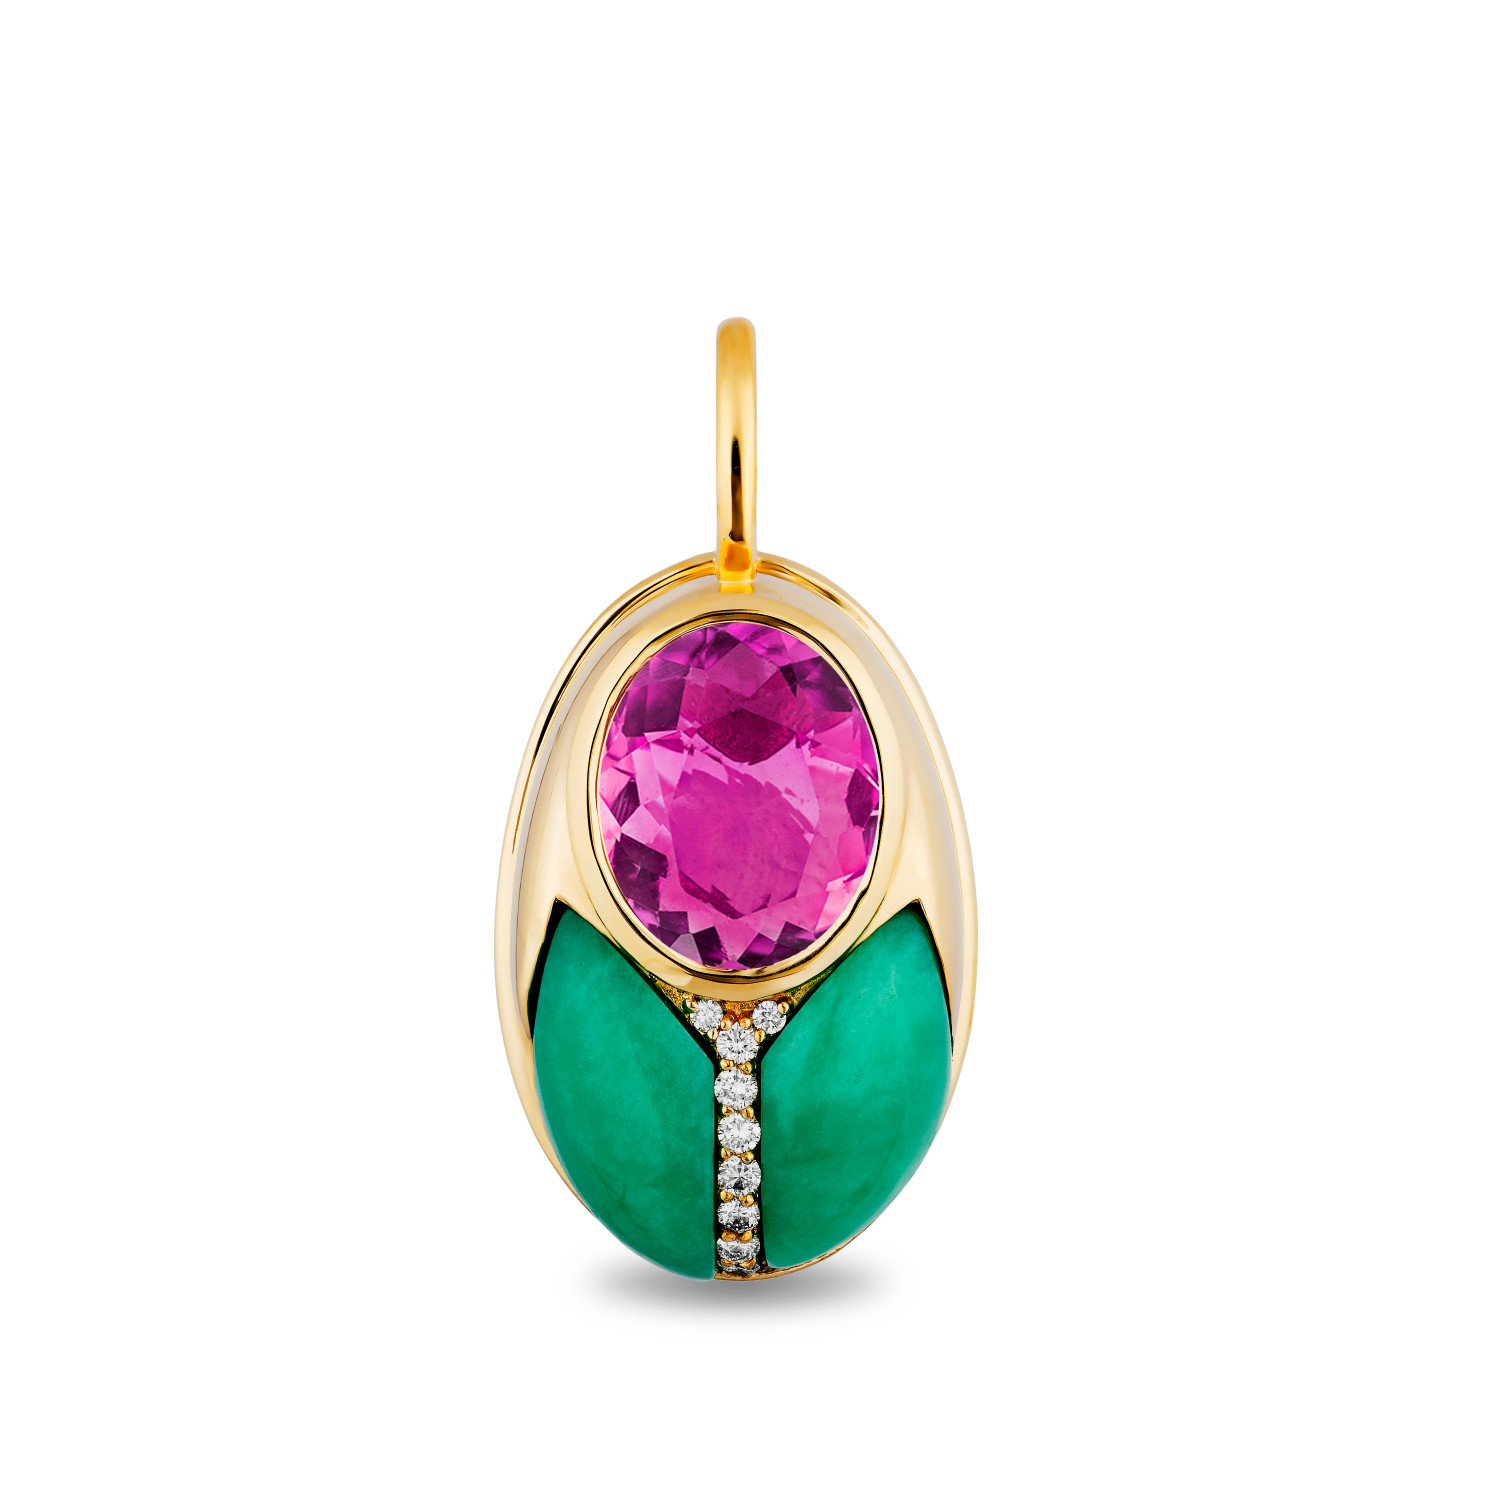 Big Love Bug Pendant in Chrysoprase and Pink Topaz in 14K Yellow Gold